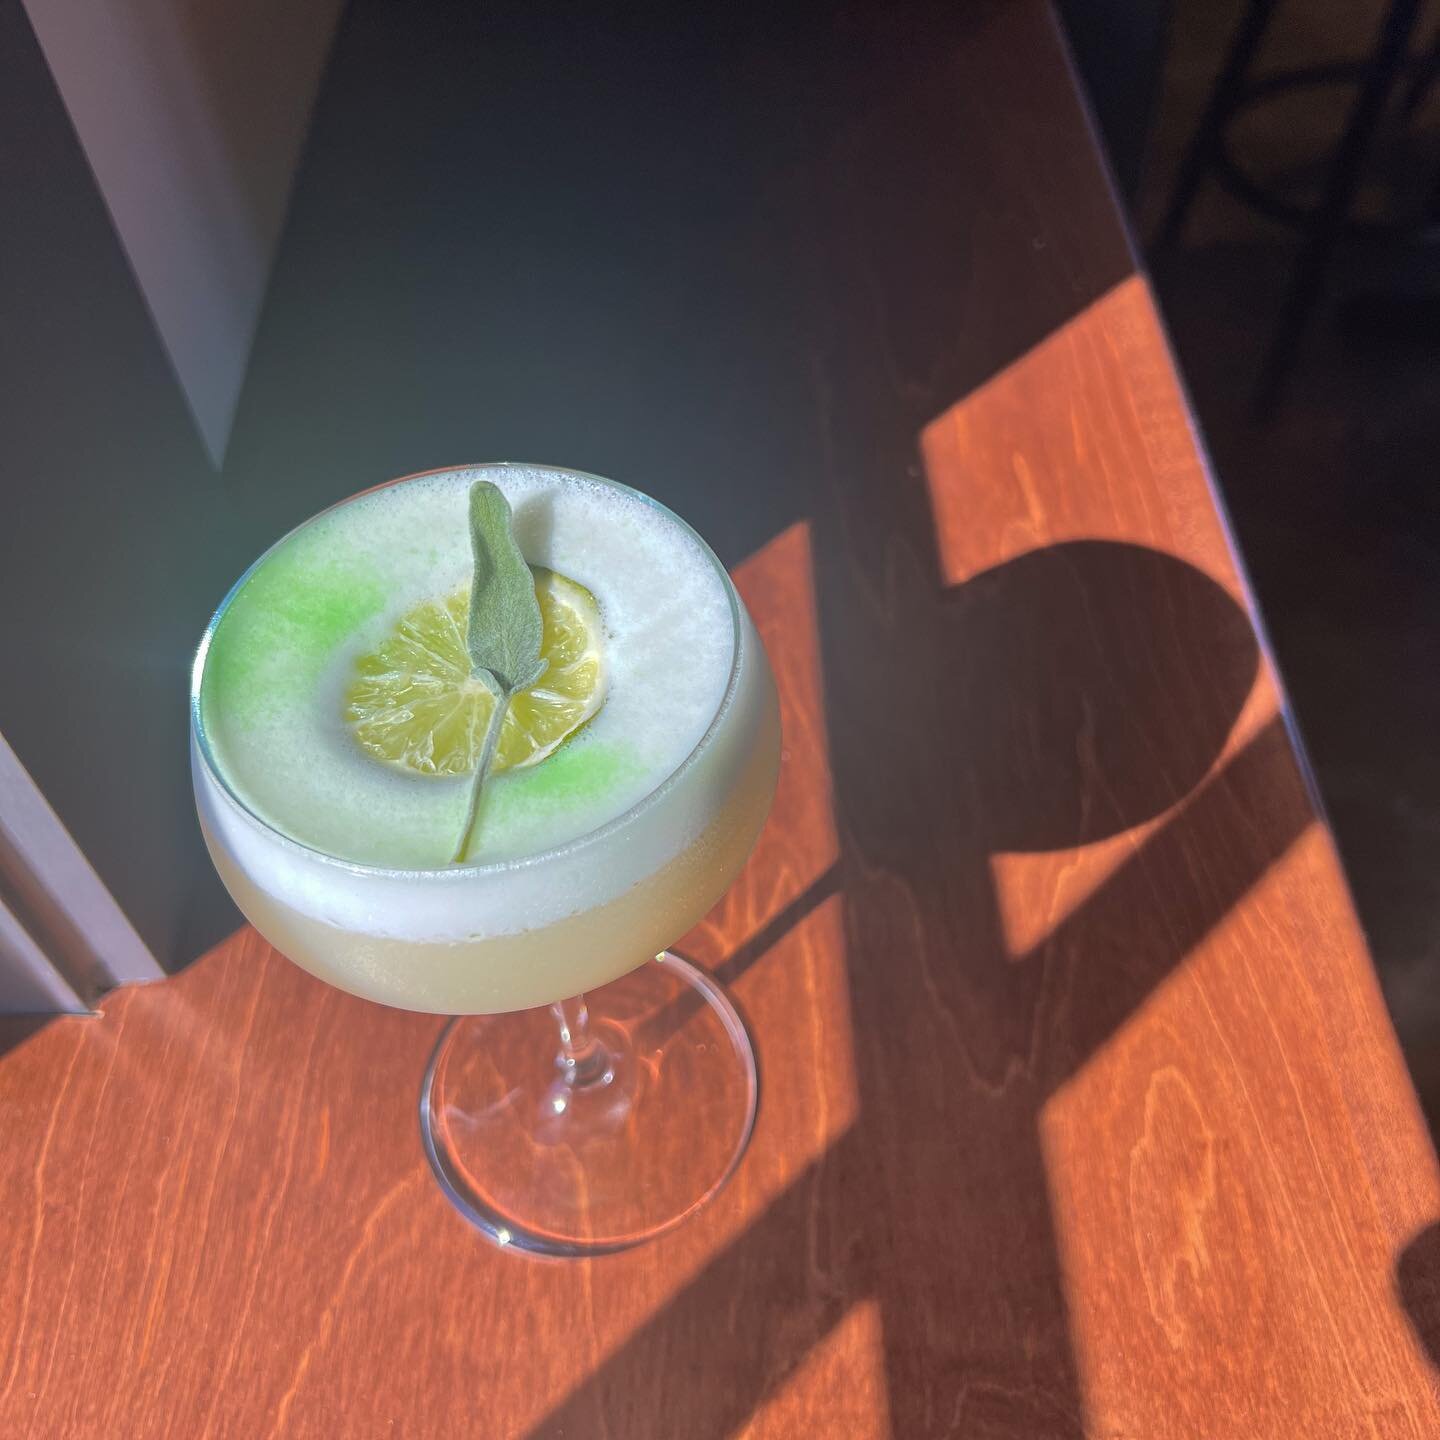 This cocktail is inspired by Dr. Anna Falcon Arthurs 
&rdquo;Green with Envy&rdquo; a clever blend of Green Chartreuse, St. Germain, lemon &amp; grapefruit juices, house-infused ginger/lemongrass/orange syrup, grapefruit bitters spritz

&ldquo;Chartr